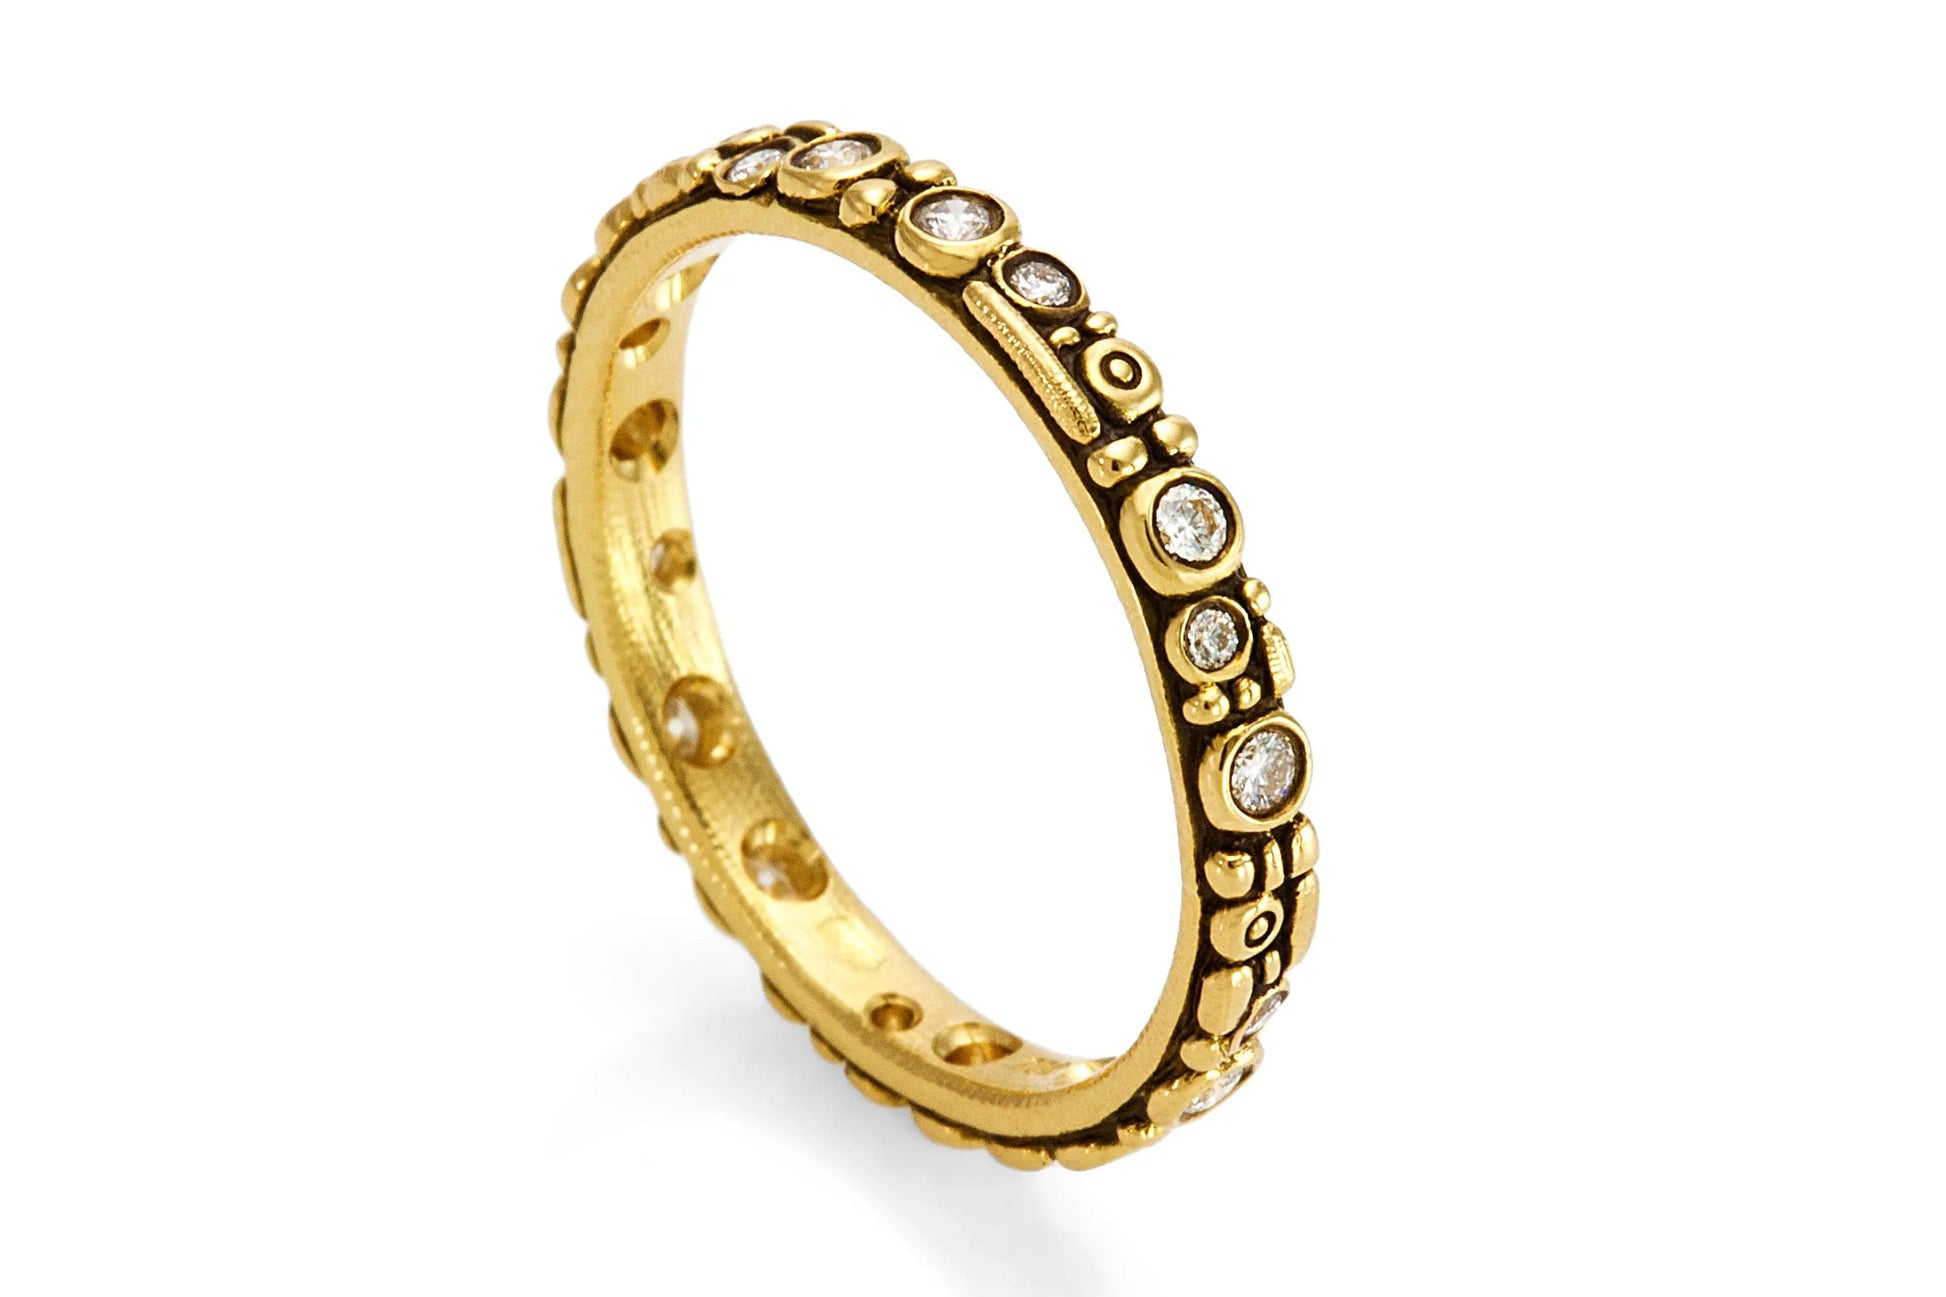 18k yellow gold and diamond "Mini 62" band  Details: 17 white diamonds .23ct  Dimensions: 2.5mm width Designed by Alex Sepkus